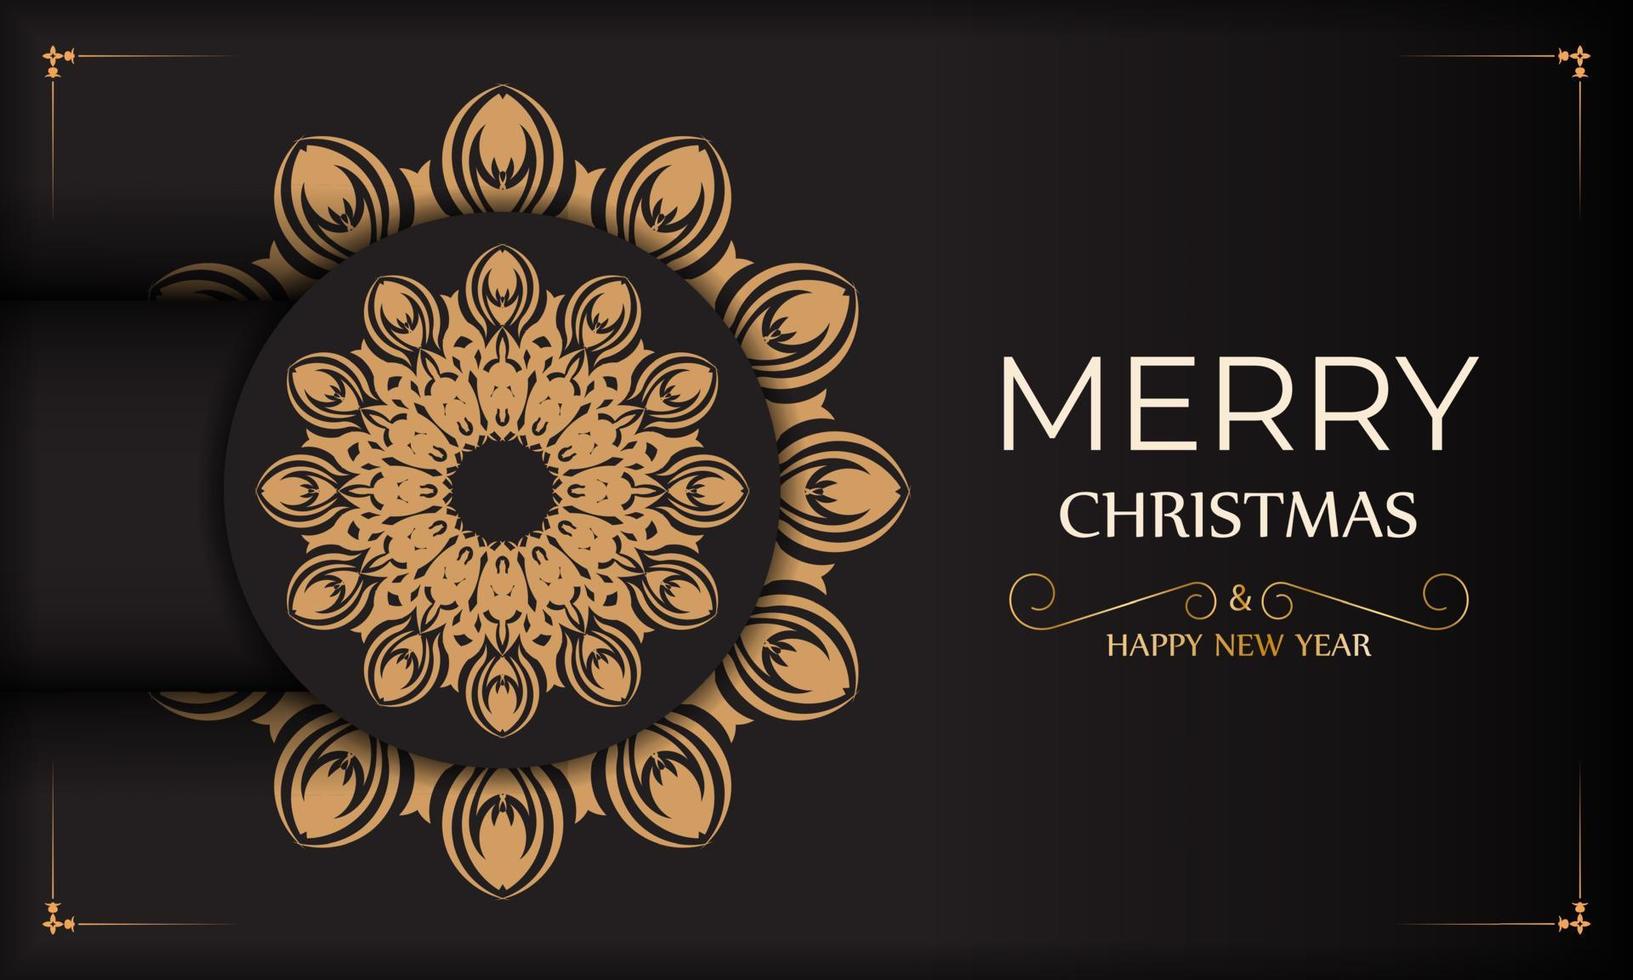 Print-ready design background with with orange winter ornaments. Merry christmas banner template with orange winter vintage ornaments in black color. vector